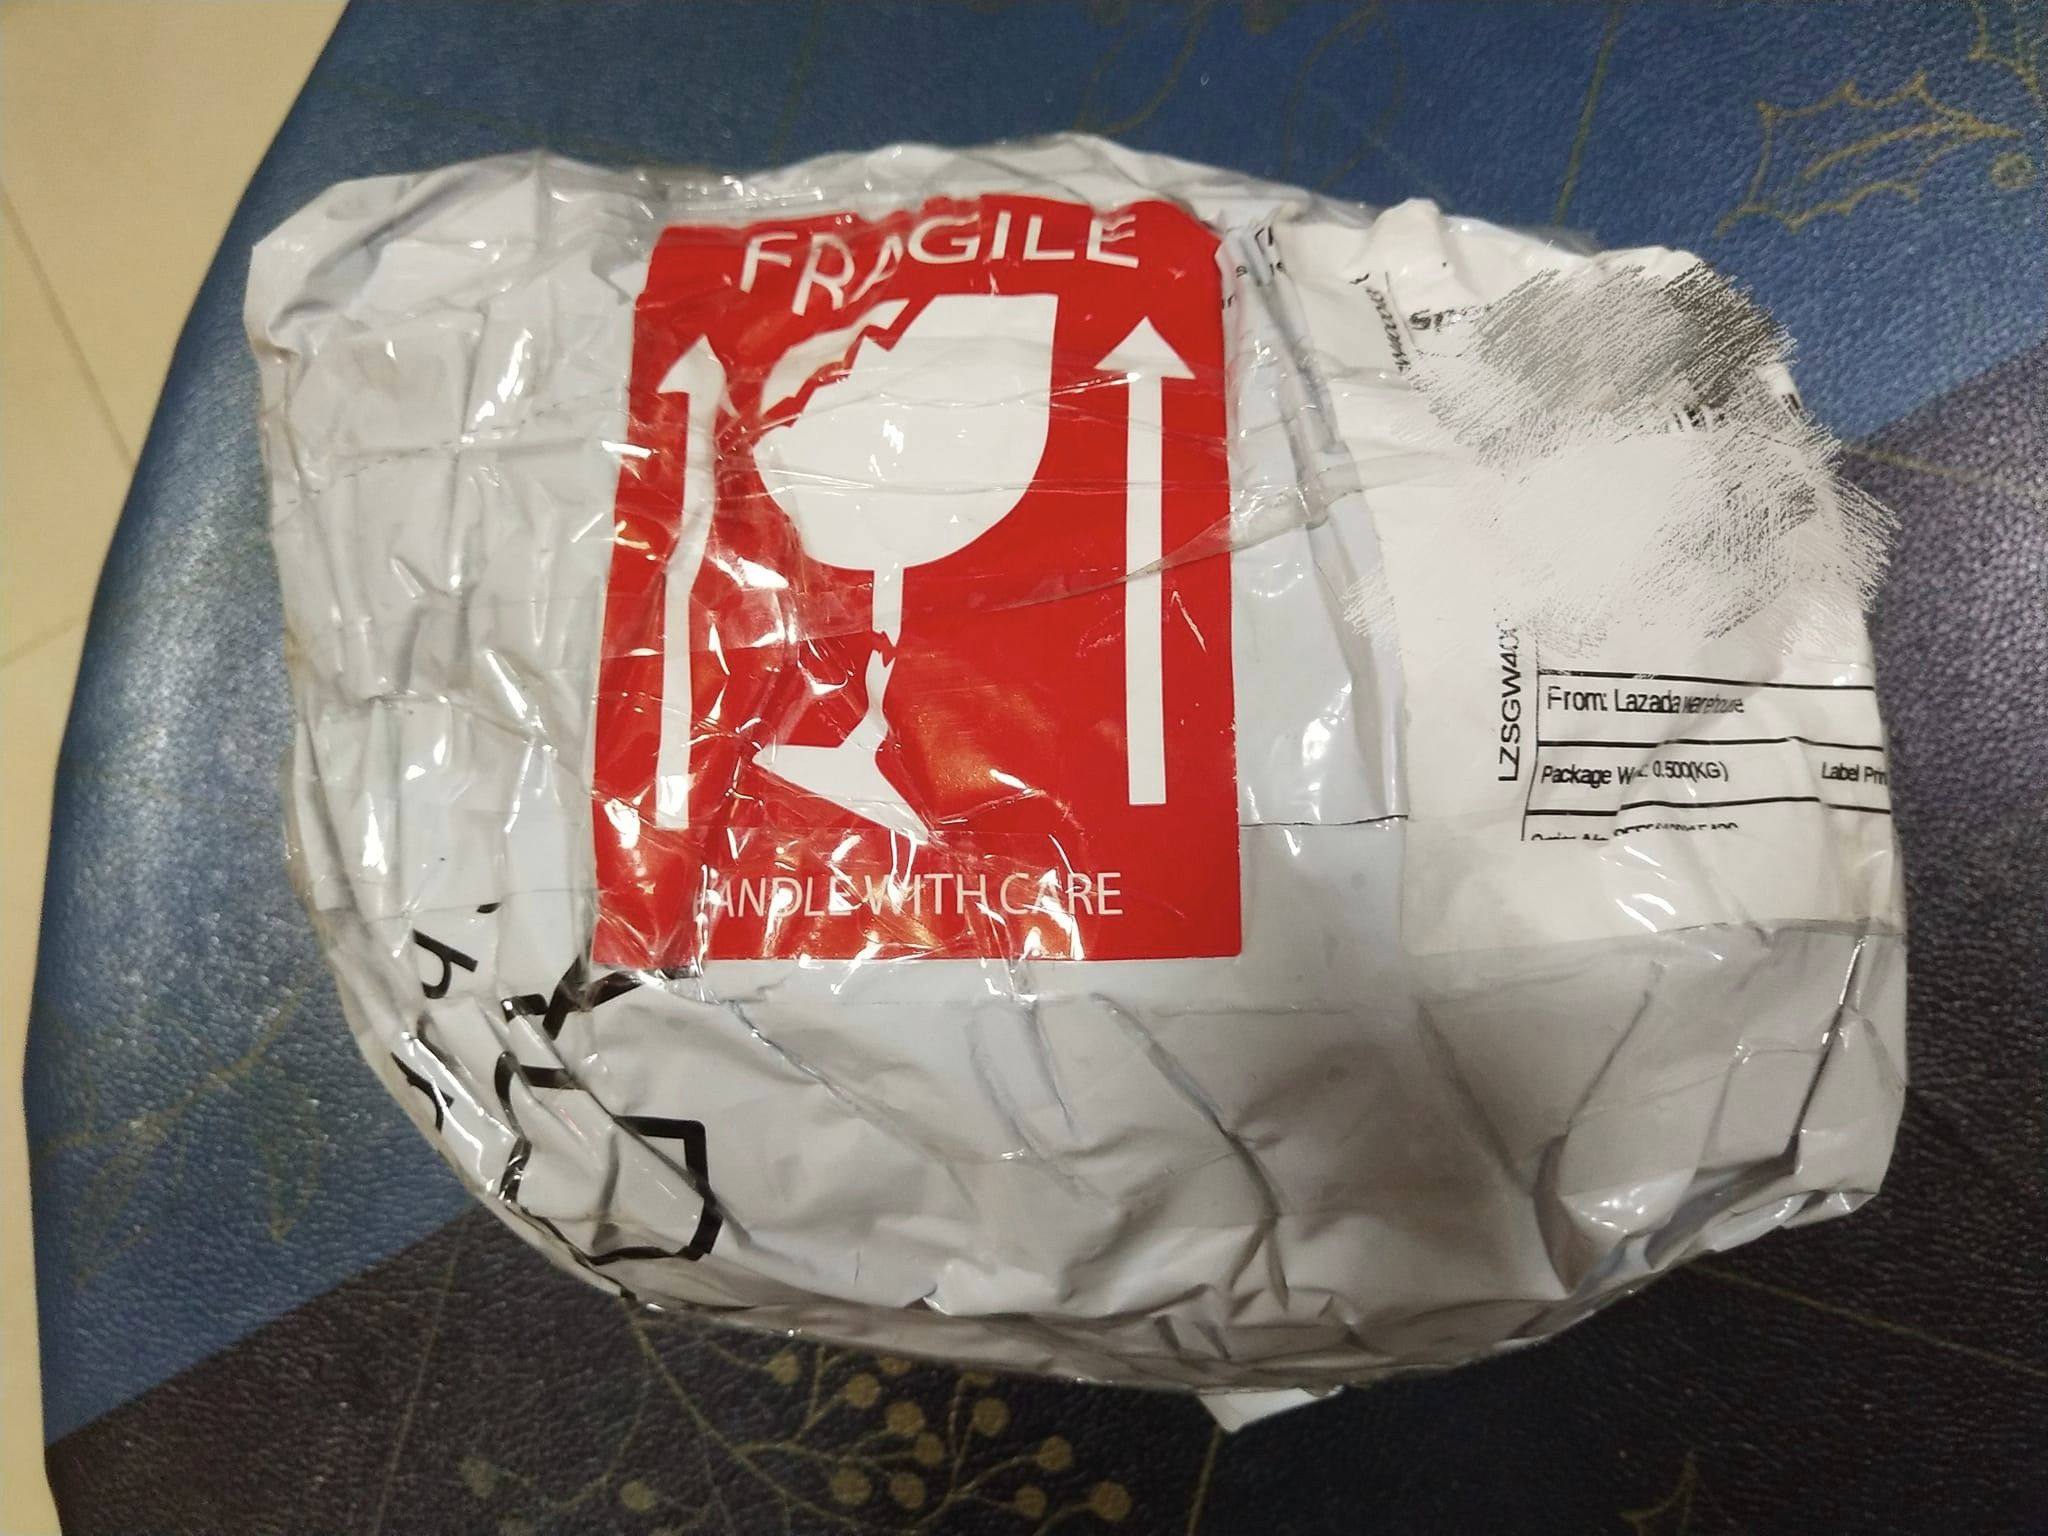 S'porean woman who purchased an iphone loses rm5. 2k after receiving an empty box from speedpost courier